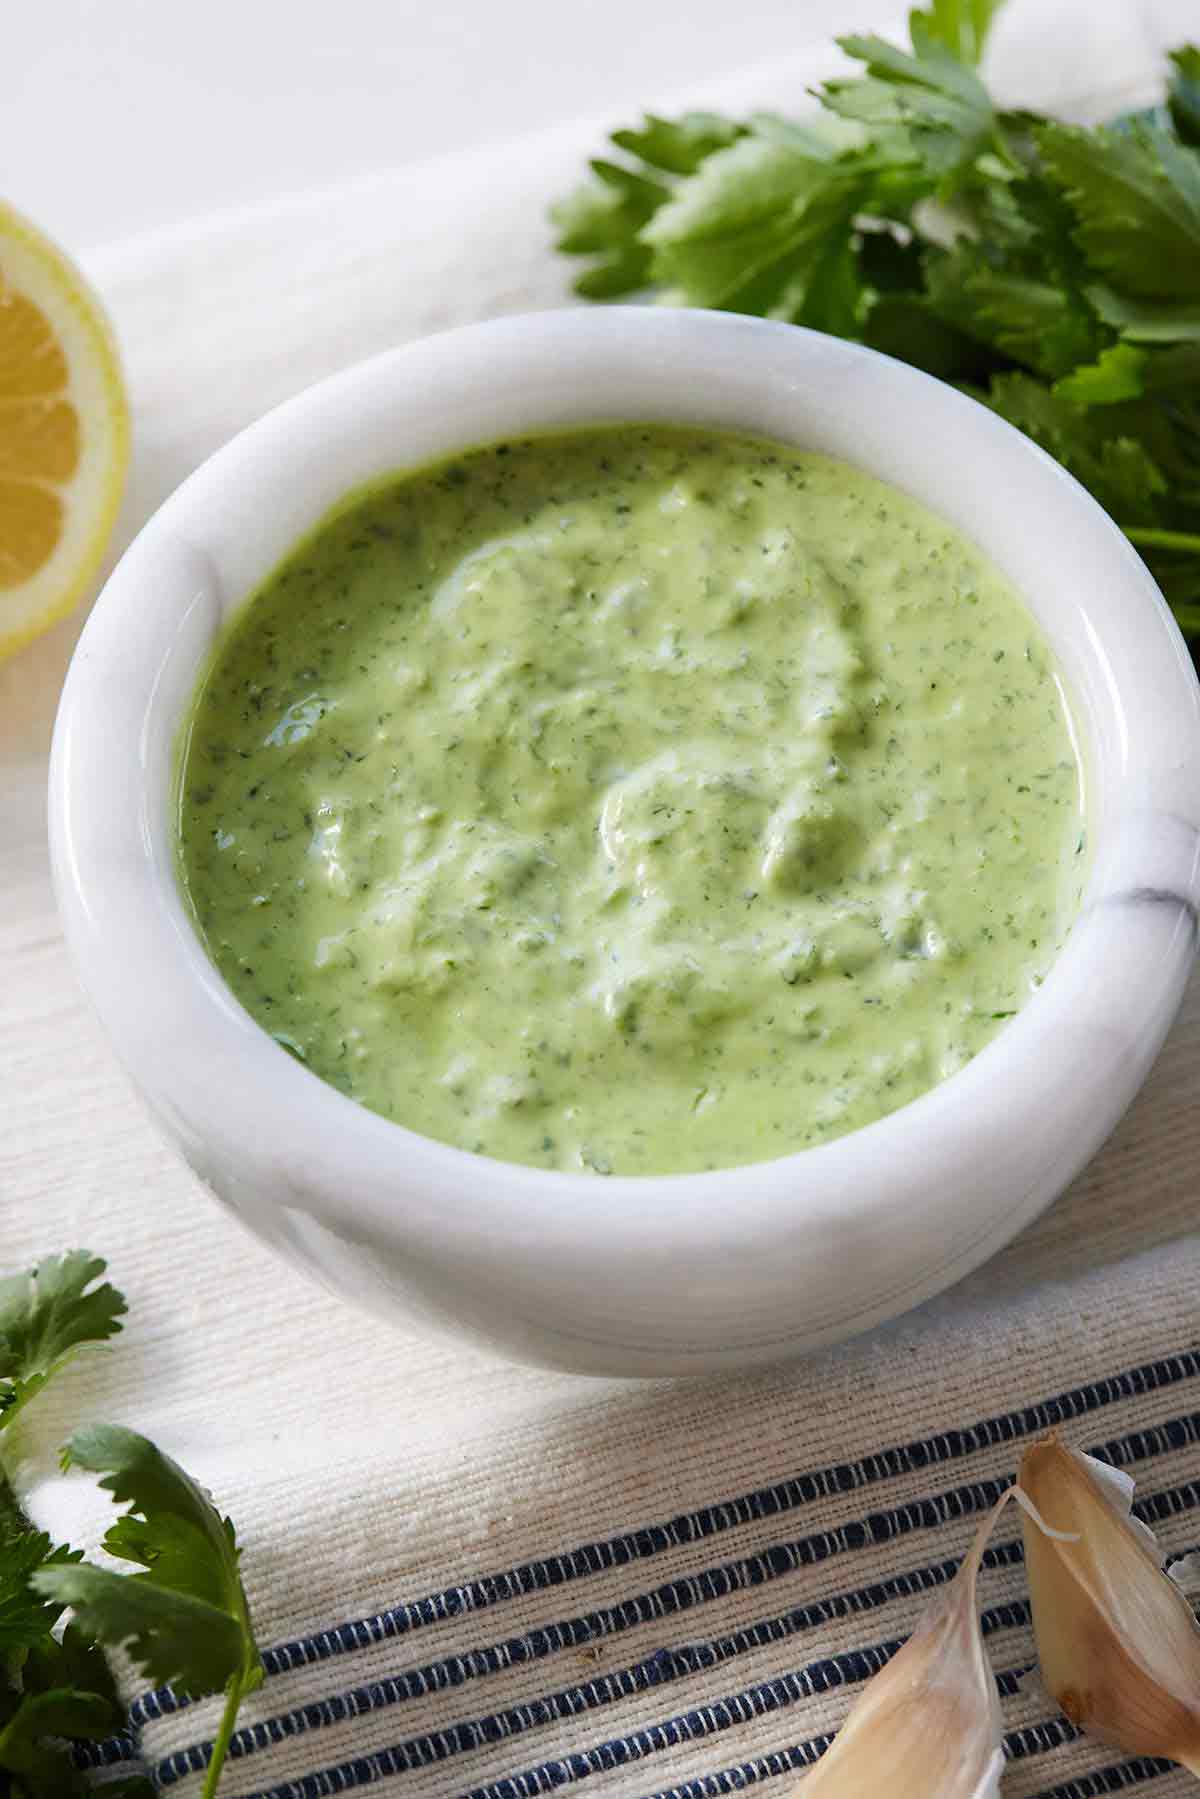 Green goddess dressing with fresh herbs and garlic cloves around it.